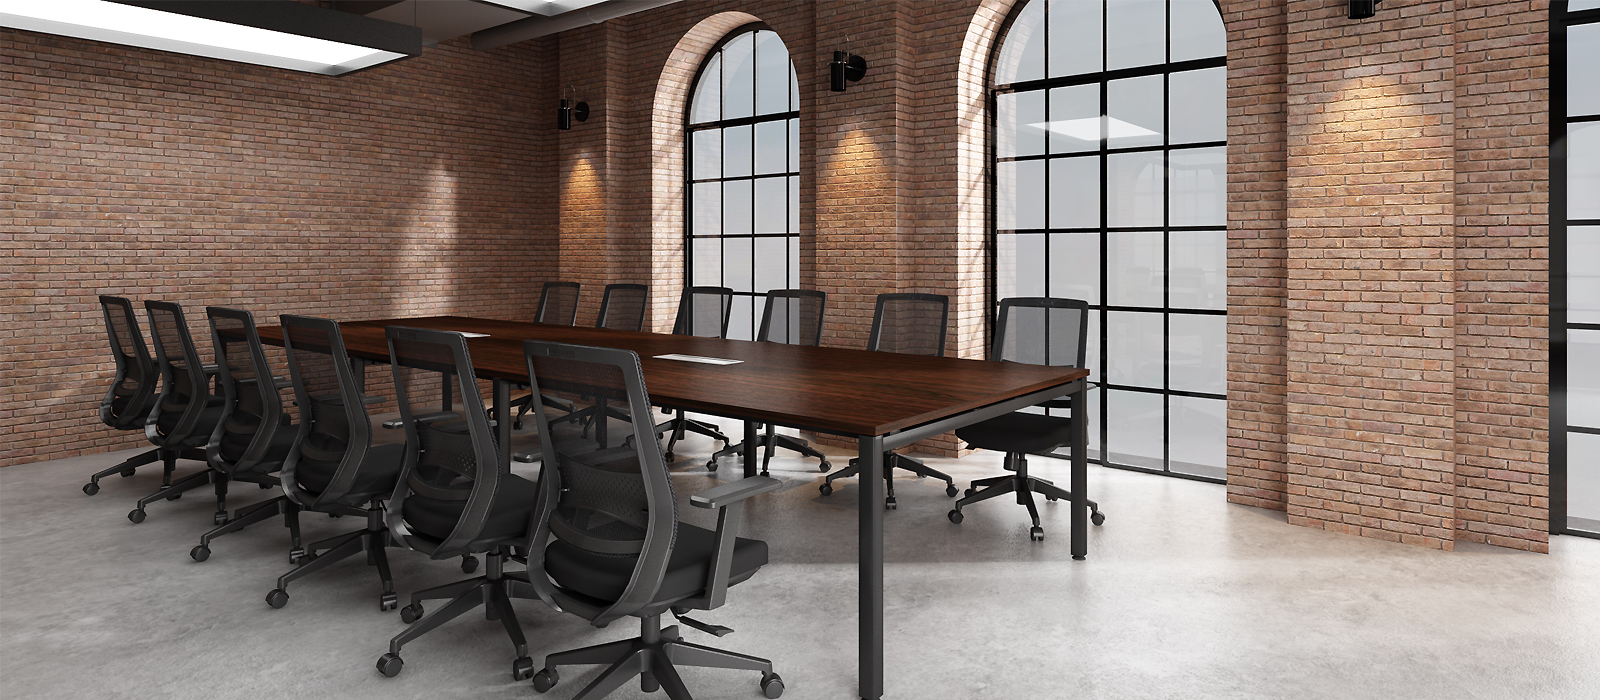 Workaholic™ One series - Straight conference table